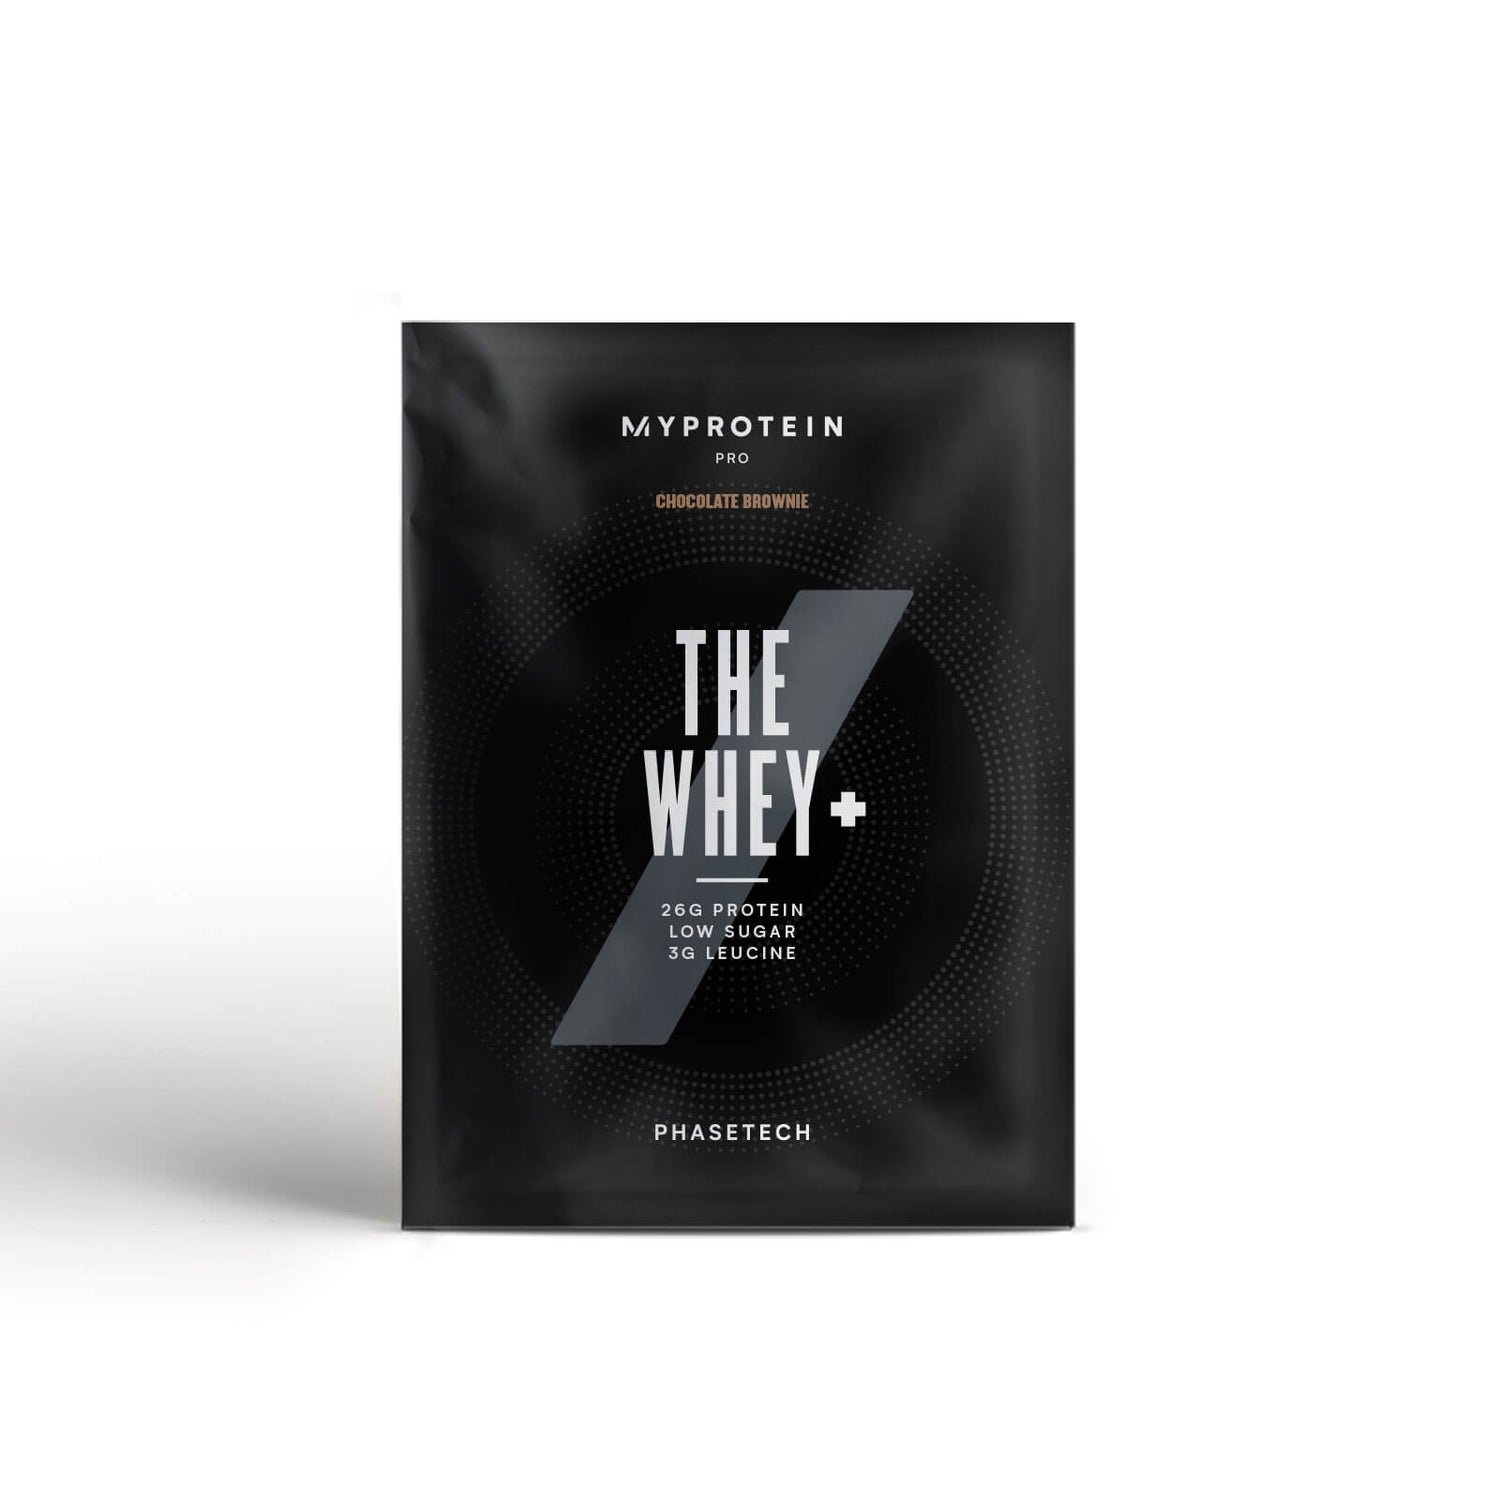 THE Whey+ (Sample)